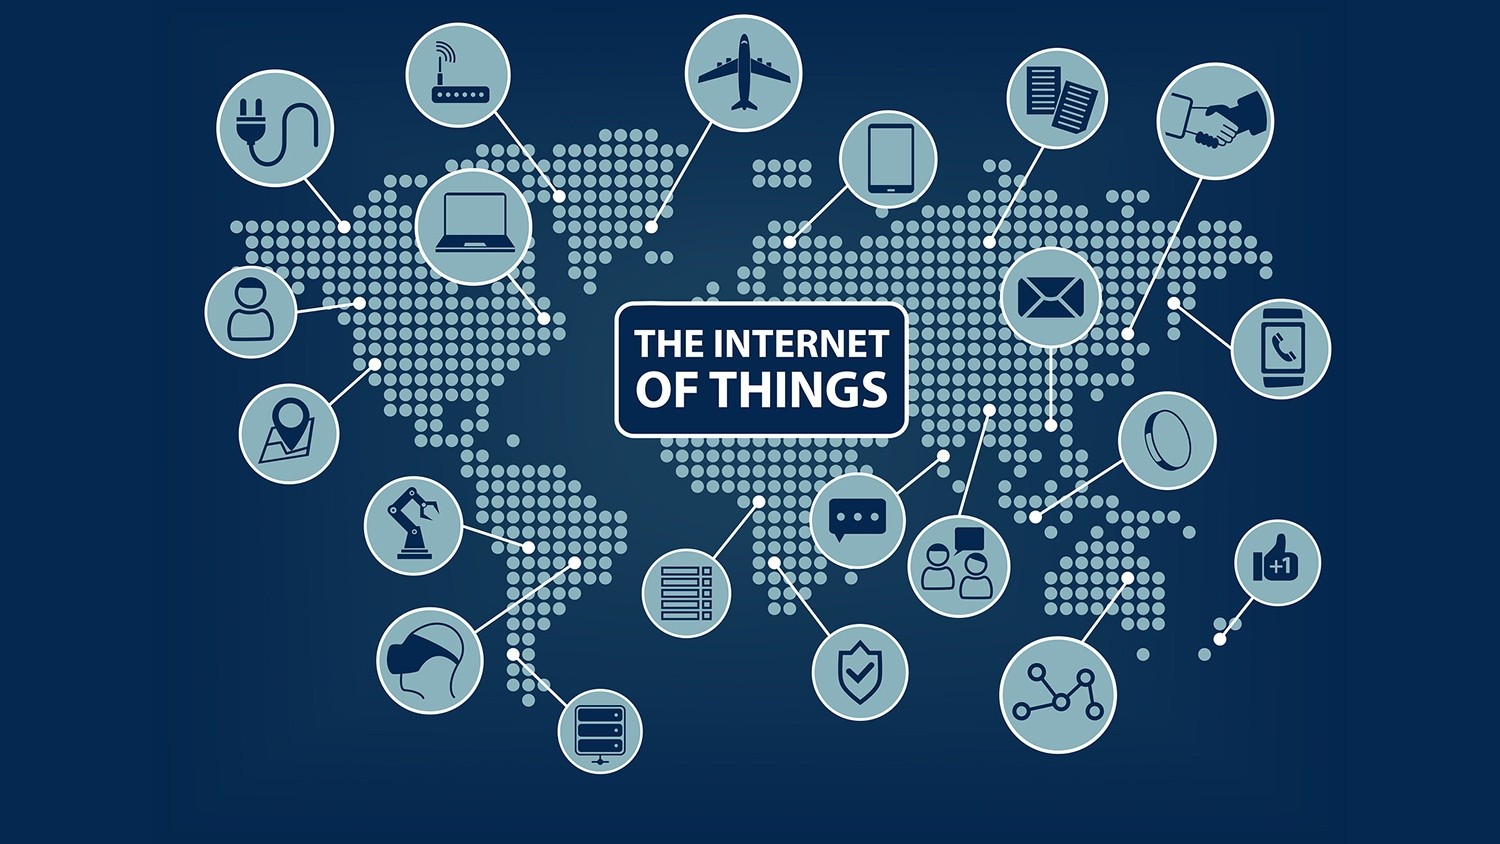 The IoT technology helps tangible objects of your daily use connect to the internet for transmitting data through algorithms, thereby serving the owners more efficiently.